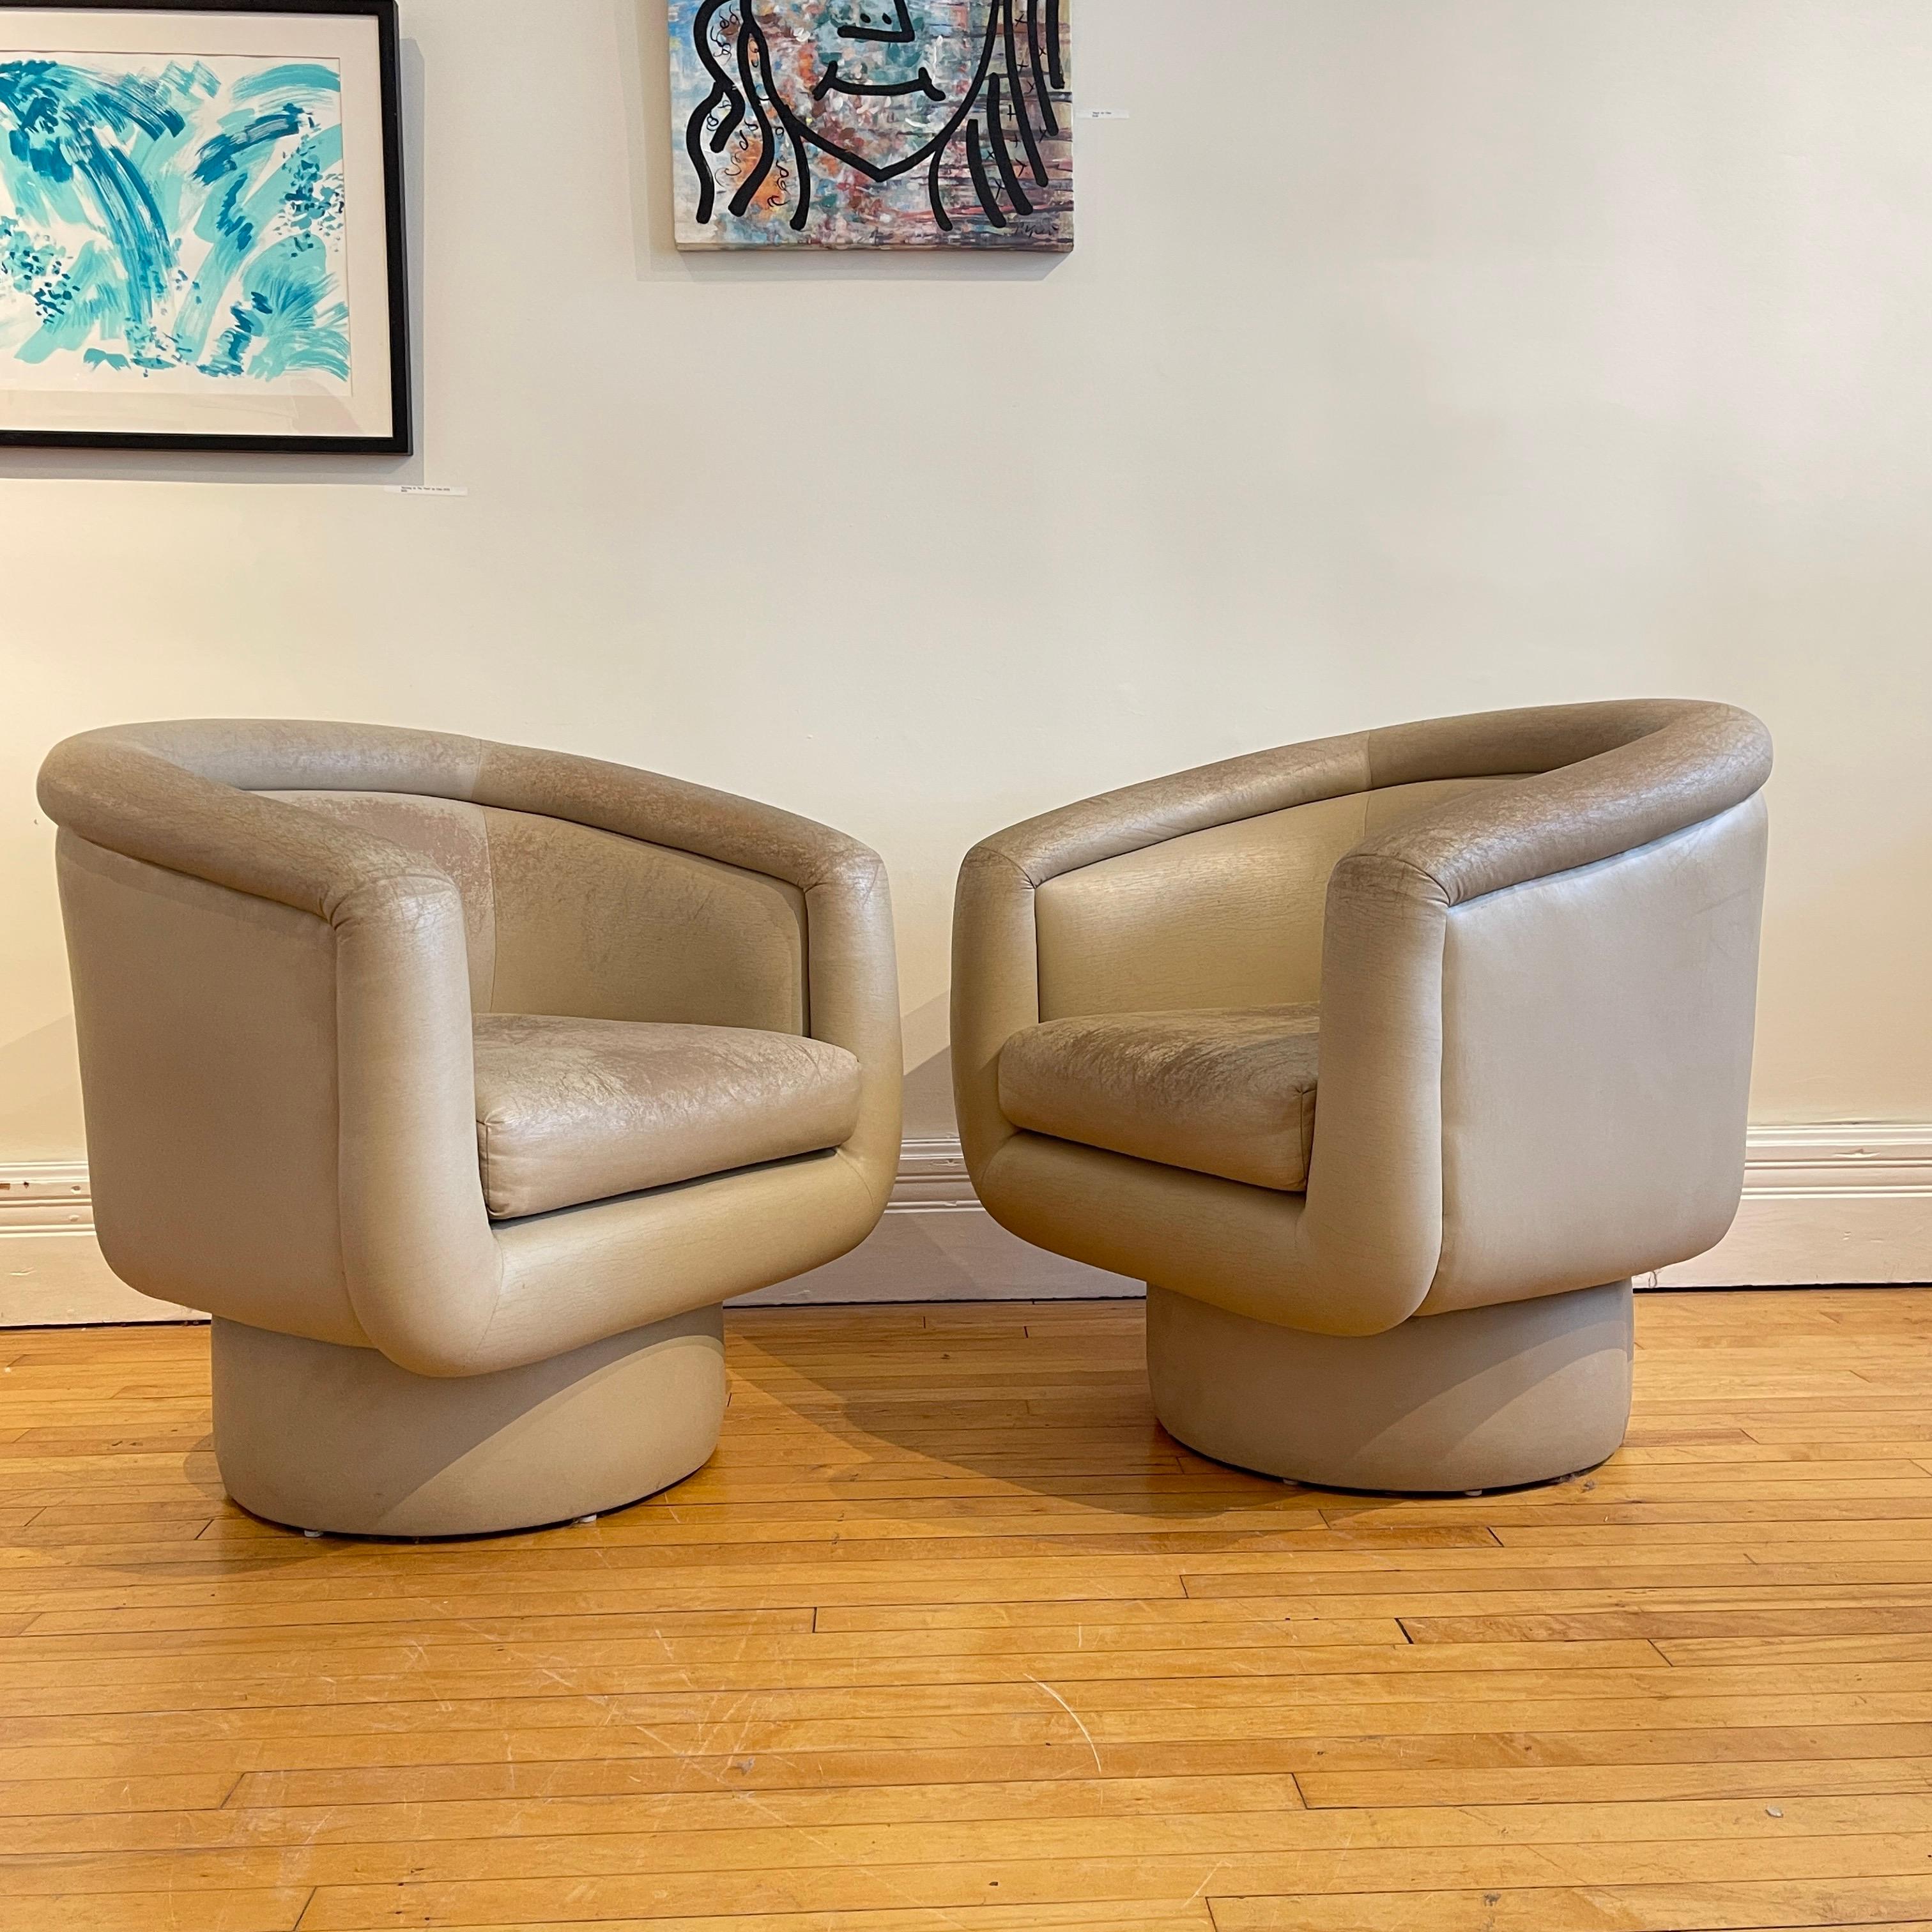 Late 20th Century Lovely Pair of Post-Modern Sculptural Patinated Swivel Chairs